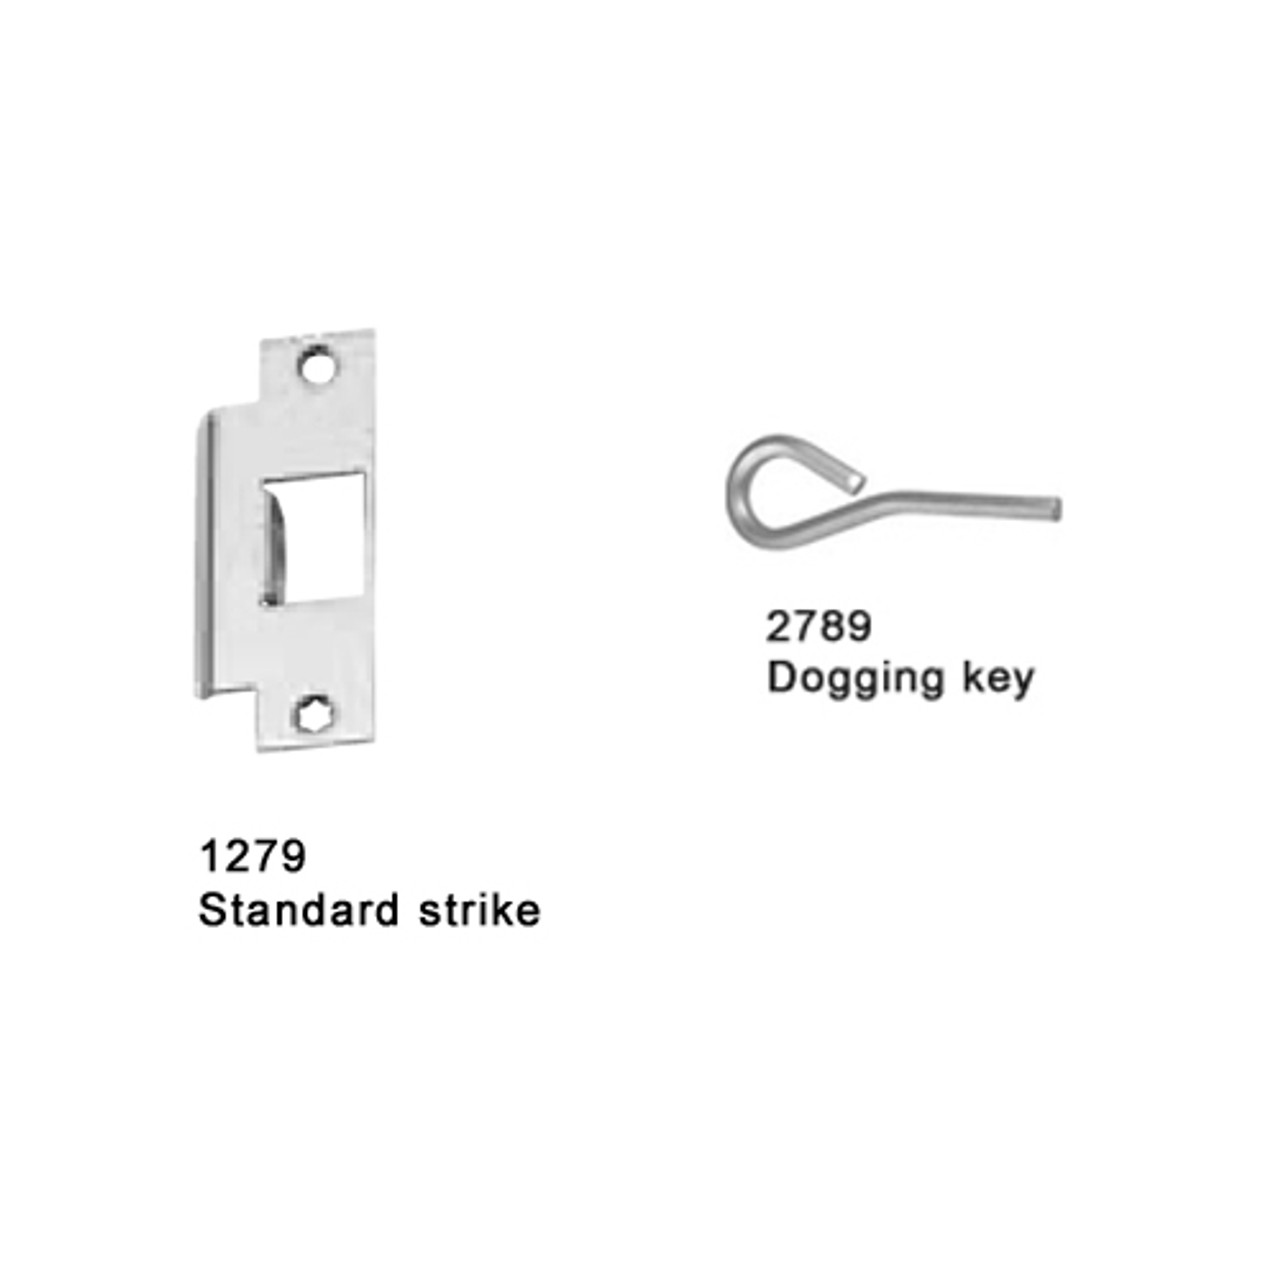 25-M-L-DT-DANE-US32-4-LHR Falcon 25 Series Mortise Lock Devices 510L-DT Dane Lever Trim with Dummy Trim in Polished Stainless Steel